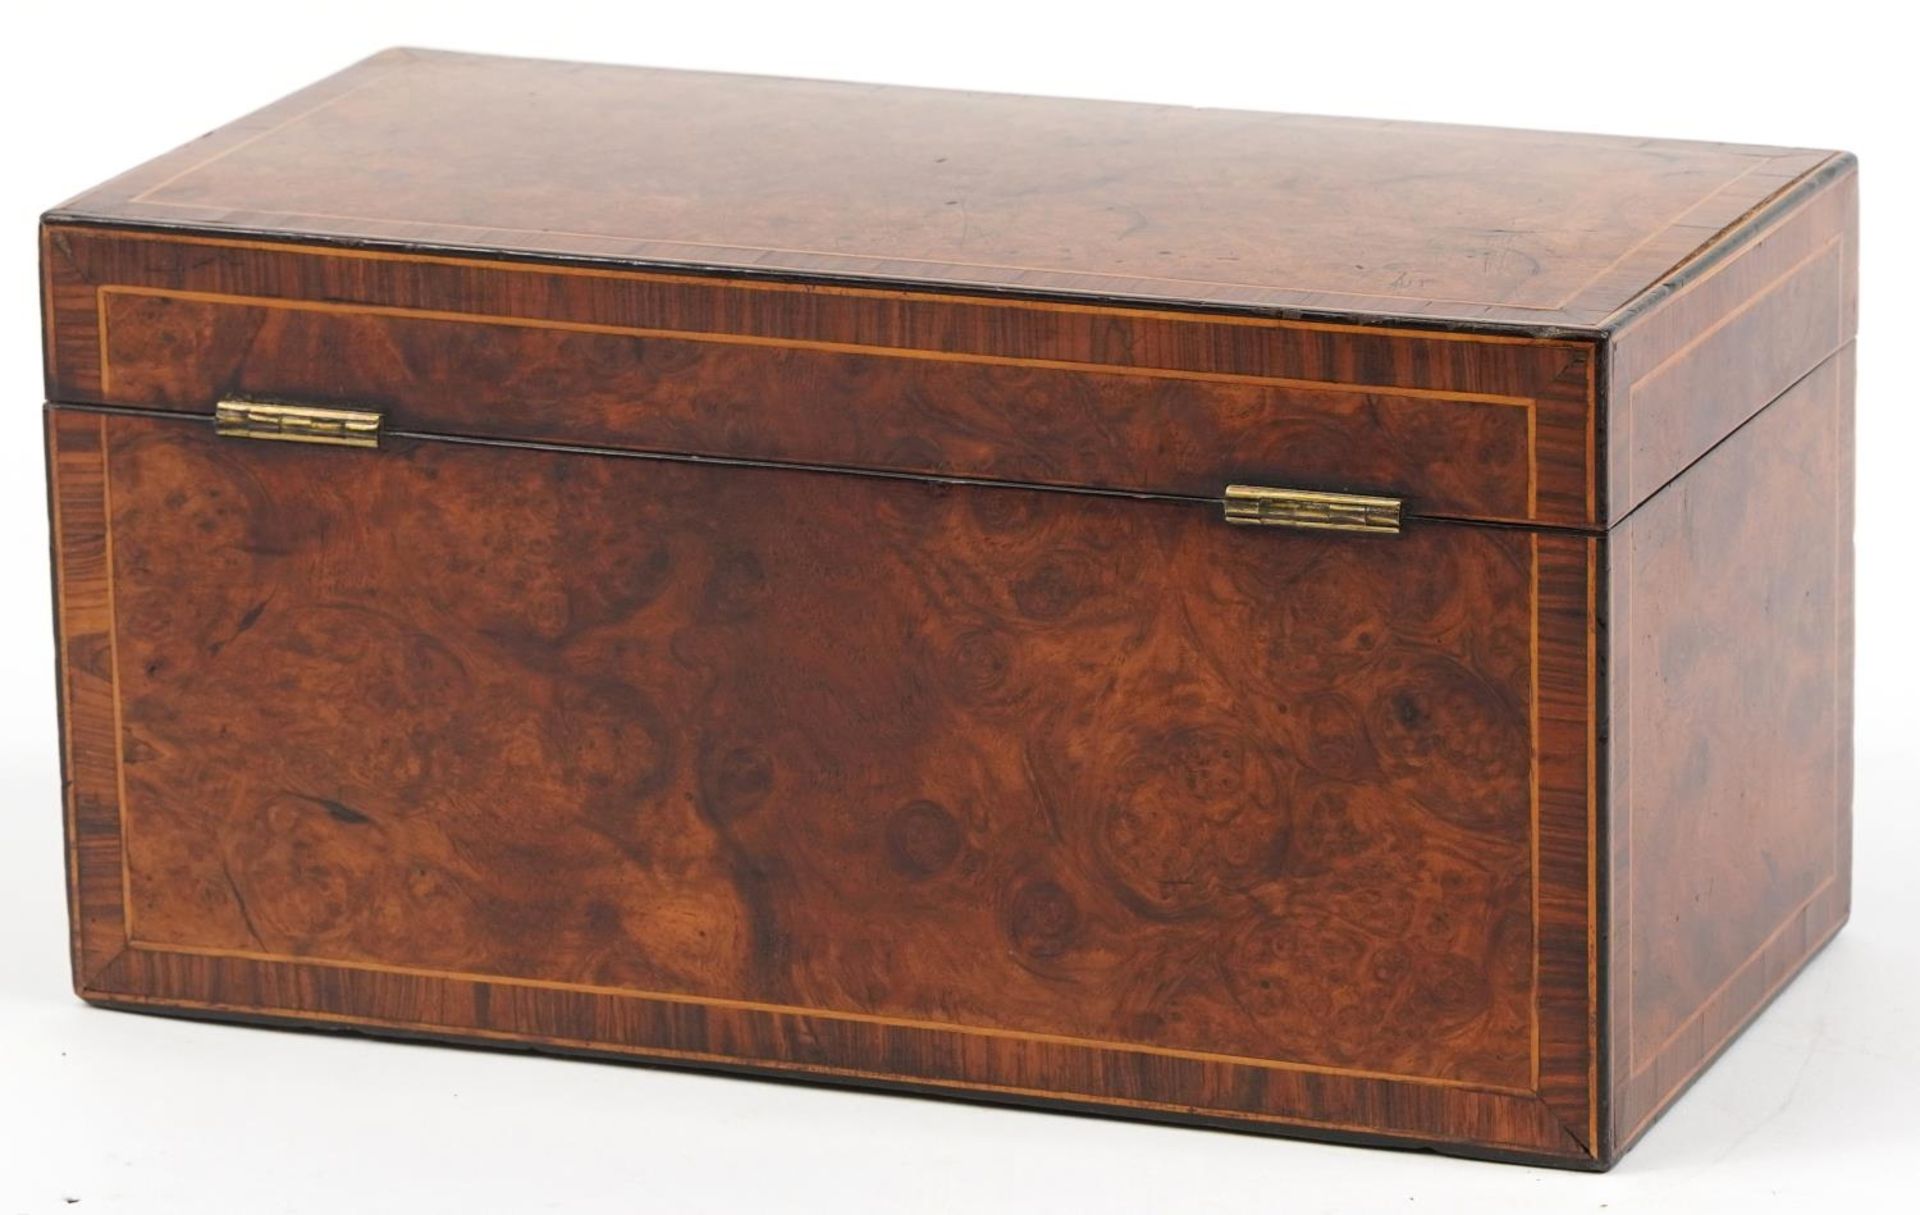 Early 19th century burr yew and walnut tea caddy with twin divisional interior having lidded - Image 3 of 4